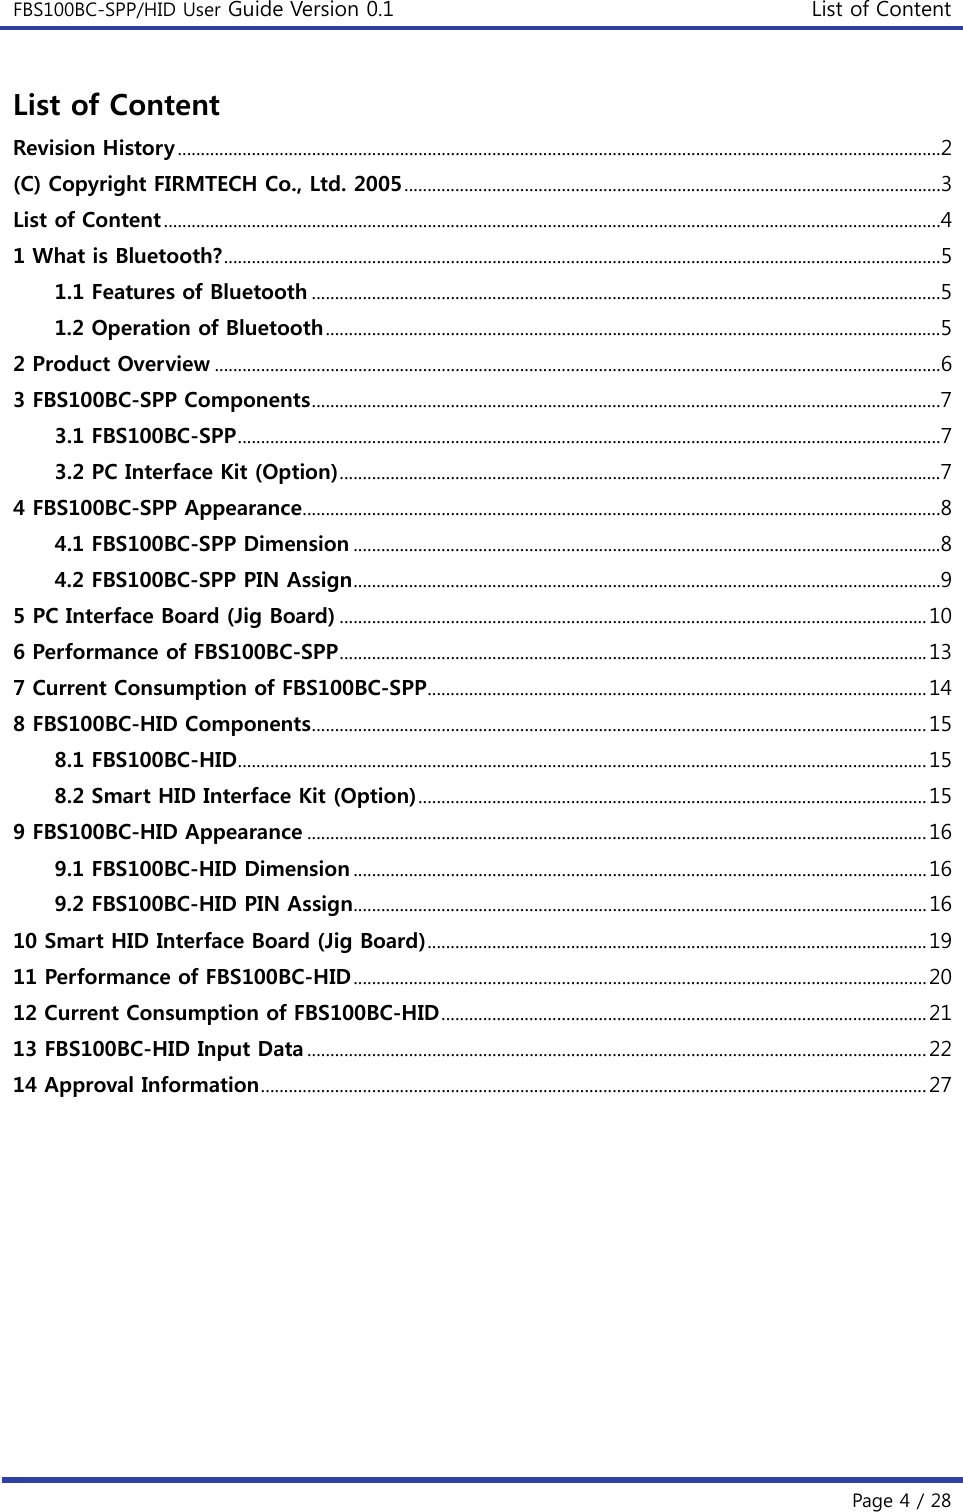 FBS100BC-SPP/HID User Guide Version 0.1 List of Content  Page 4 / 28 List of Content Revision History .....................................................................................................................................................................2 (C) Copyright FIRMTECH Co., Ltd. 2005 ....................................................................................................................3 List of Content ........................................................................................................................................................................4 1 What is Bluetooth? ...........................................................................................................................................................5 1.1 Features of Bluetooth ........................................................................................................................................5 1.2 Operation of Bluetooth .....................................................................................................................................5 2 Product Overview .............................................................................................................................................................6 3 FBS100BC-SPP Components ........................................................................................................................................7 3.1 FBS100BC-SPP ........................................................................................................................................................7 3.2 PC Interface Kit (Option) ..................................................................................................................................7 4 FBS100BC-SPP Appearance ..........................................................................................................................................8 4.1 FBS100BC-SPP Dimension ...............................................................................................................................8 4.2 FBS100BC-SPP PIN Assign ...............................................................................................................................9 5 PC Interface Board (Jig Board) ............................................................................................................................... 10 6 Performance of FBS100BC-SPP ............................................................................................................................... 13 7 Current Consumption of FBS100BC-SPP ............................................................................................................ 14 8 FBS100BC-HID Components ..................................................................................................................................... 15 8.1 FBS100BC-HID ..................................................................................................................................................... 15 8.2 Smart HID Interface Kit (Option) .............................................................................................................. 15 9 FBS100BC-HID Appearance ...................................................................................................................................... 16 9.1 FBS100BC-HID Dimension ............................................................................................................................ 16 9.2 FBS100BC-HID PIN Assign ............................................................................................................................ 16 10 Smart HID Interface Board (Jig Board) ............................................................................................................ 19 11 Performance of FBS100BC-HID ............................................................................................................................ 20 12 Current Consumption of FBS100BC-HID ......................................................................................................... 21 13 FBS100BC-HID Input Data ...................................................................................................................................... 22 14 Approval Information ................................................................................................................................................ 27         